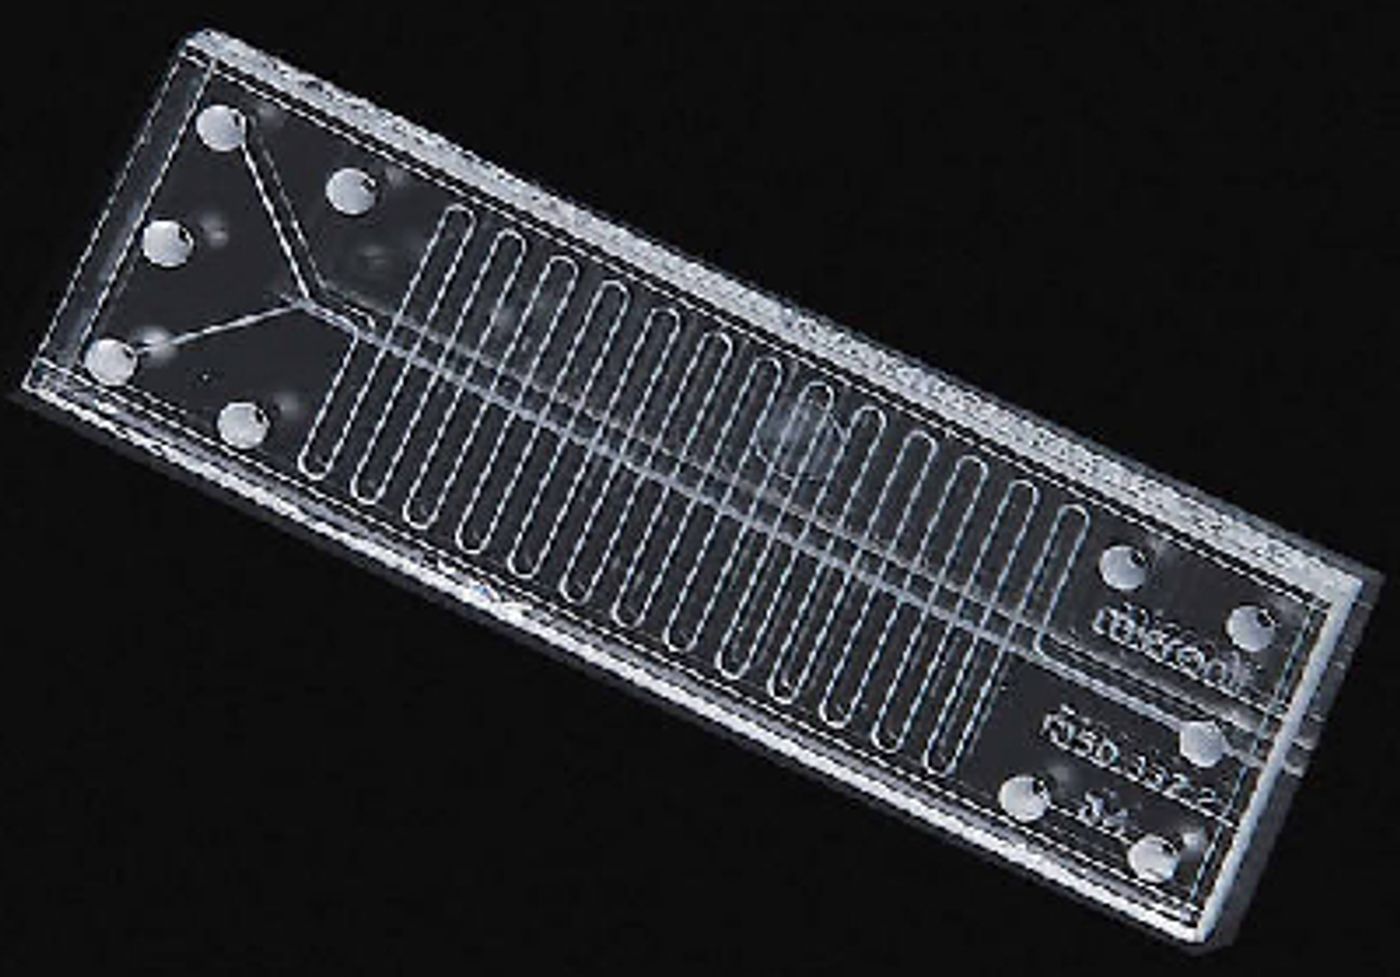 An example of a microfluidics chip used for cell separation (thomasnet)